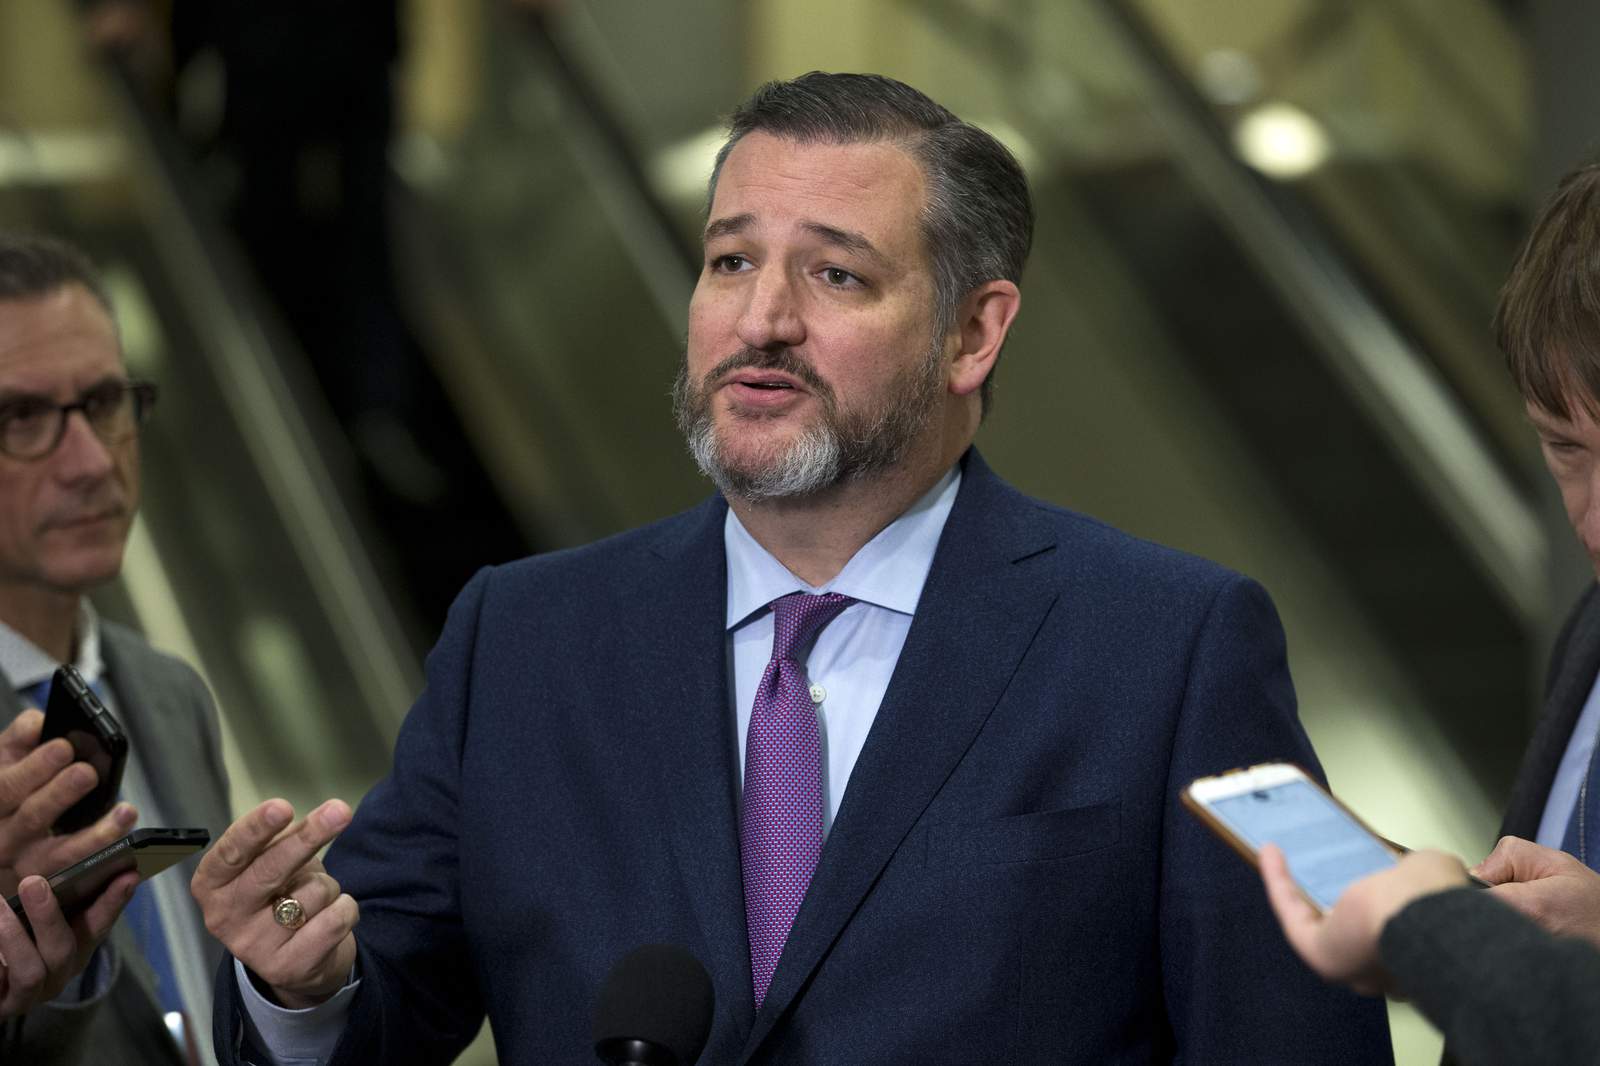 Sen. Ted Cruz calls for DOJ investigation into Netflix film ‘Cuties’ for allegedly sexualizing young girls